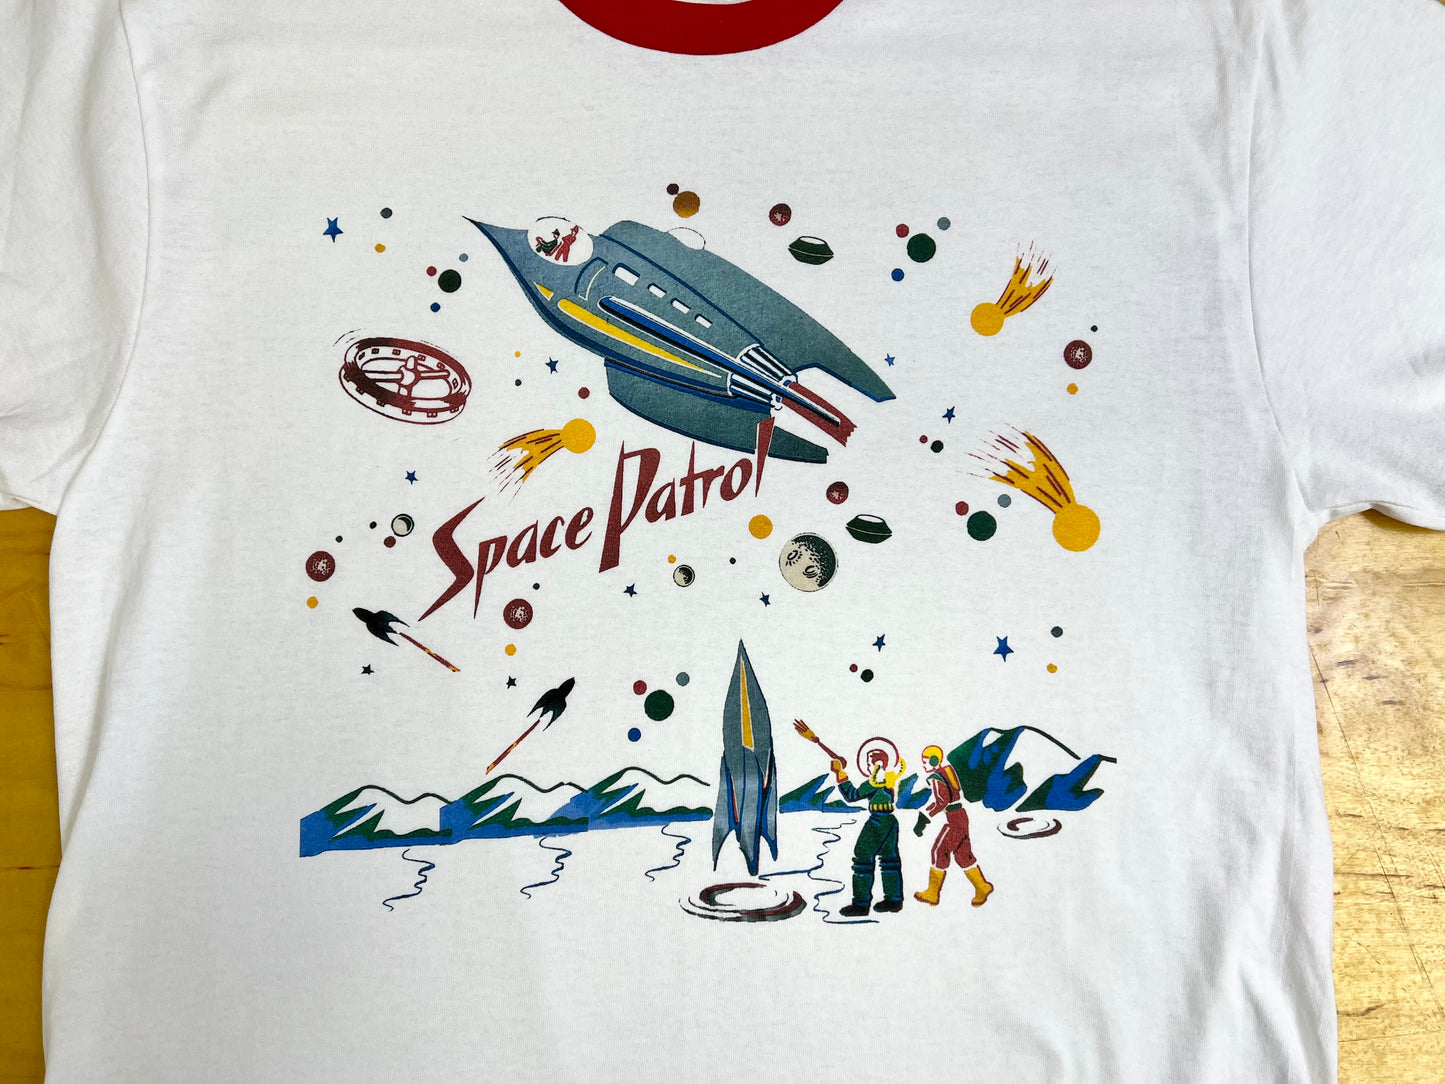 Space Patrol Red and White Ringer T-Shirt